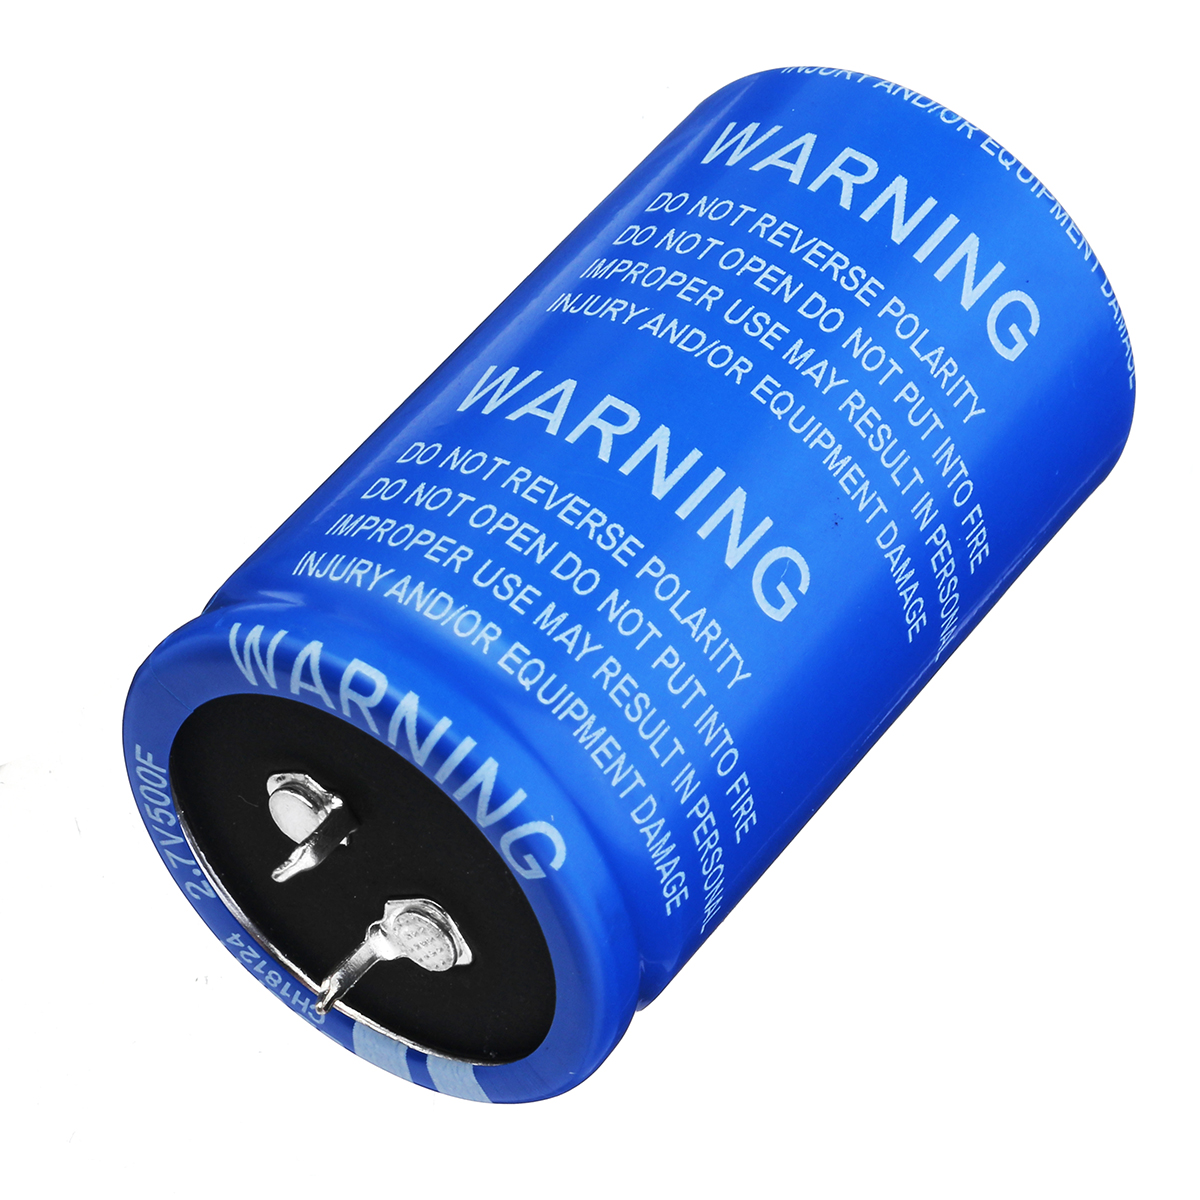 

3pcs Super Fala Capacitor 2.7v500f Can Be Used As Vehicle Rectifier Low Temperature Starting Capacitor Blue 2.7V 500F